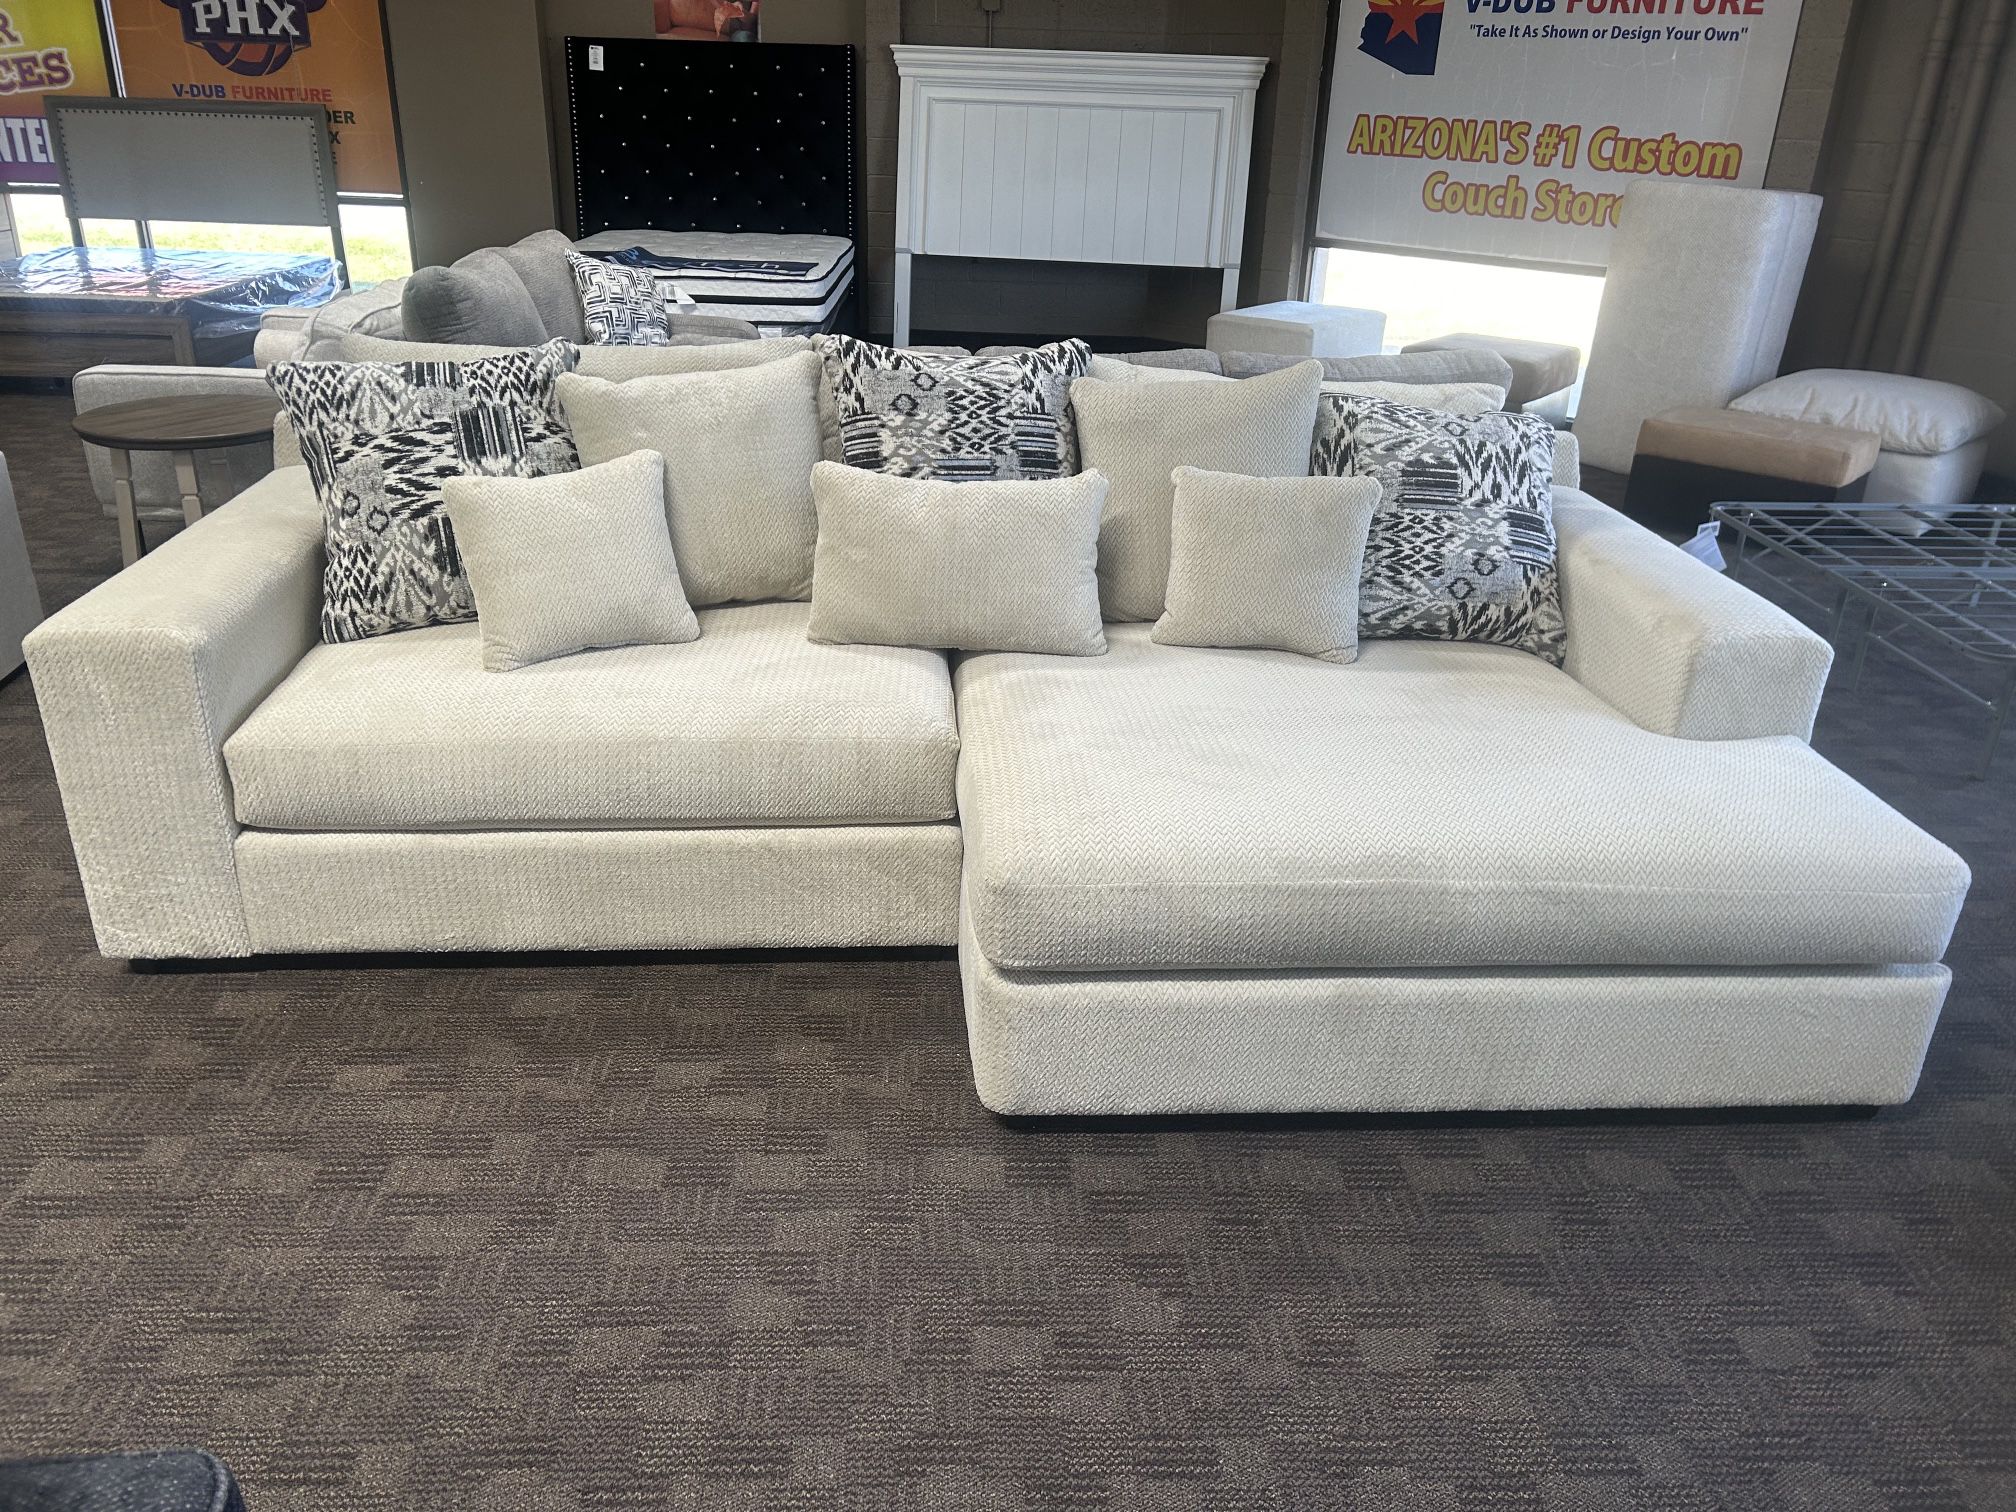 Oversized Fluffy Cream Sectional Couch 